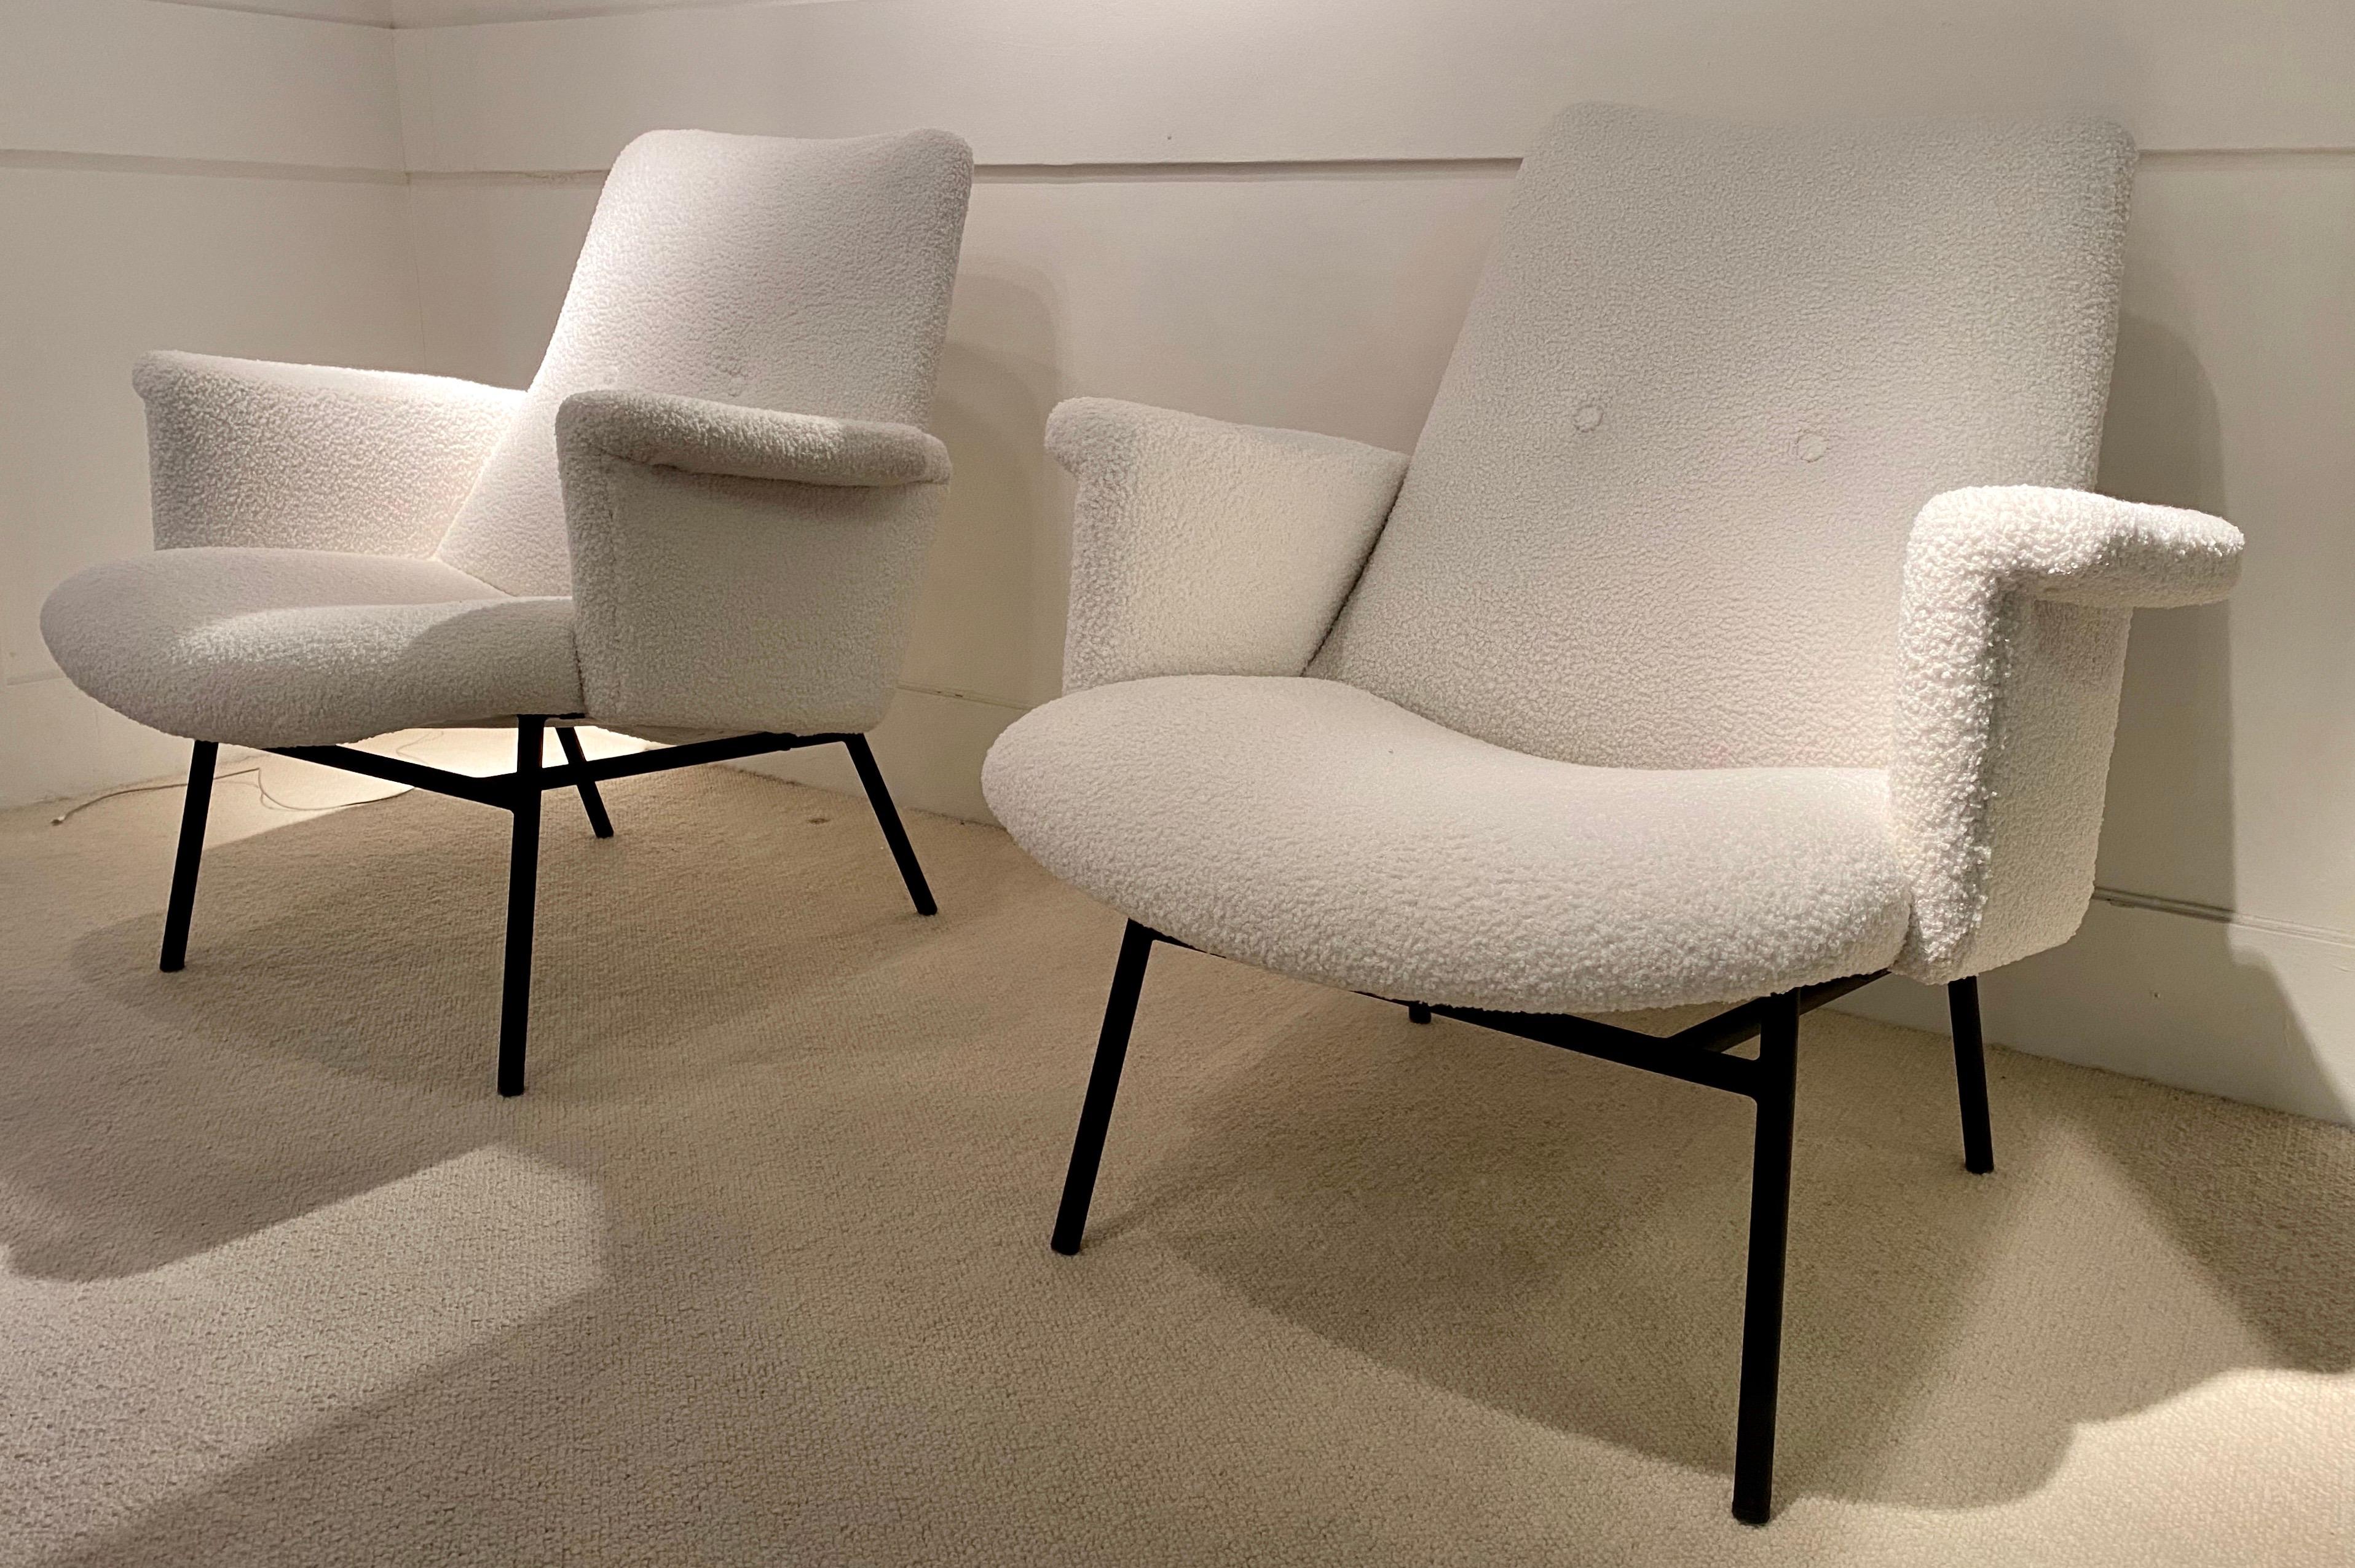 Pierre Guariche armchair with black iron feet structure and white fabric
Steiner Edition from 1960s
New upholstered
Perfect condition.